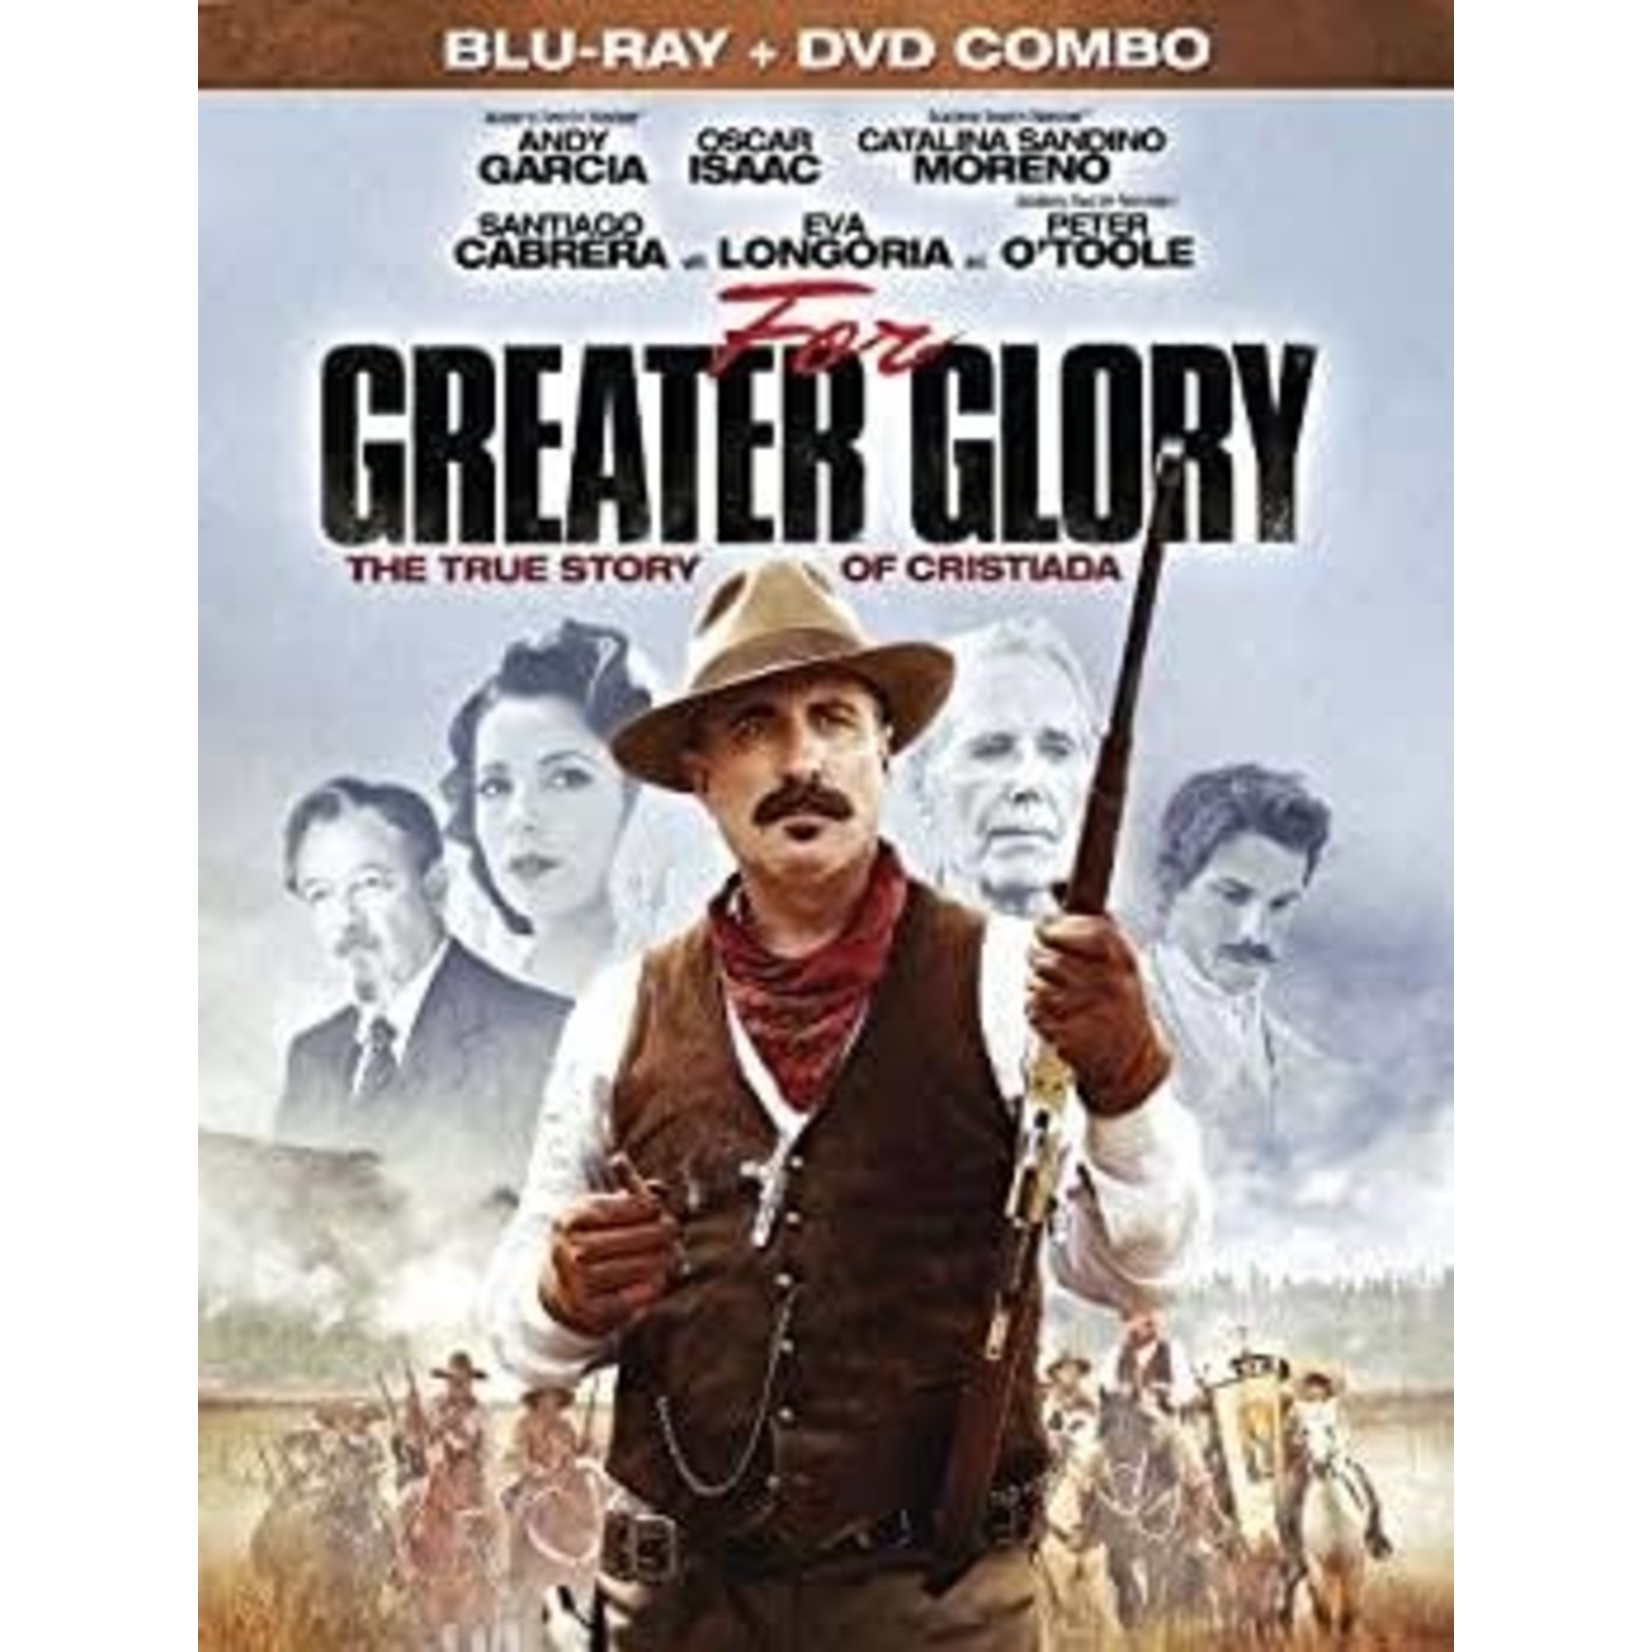 For Greater Glory Blu-Ray+DVD Combo